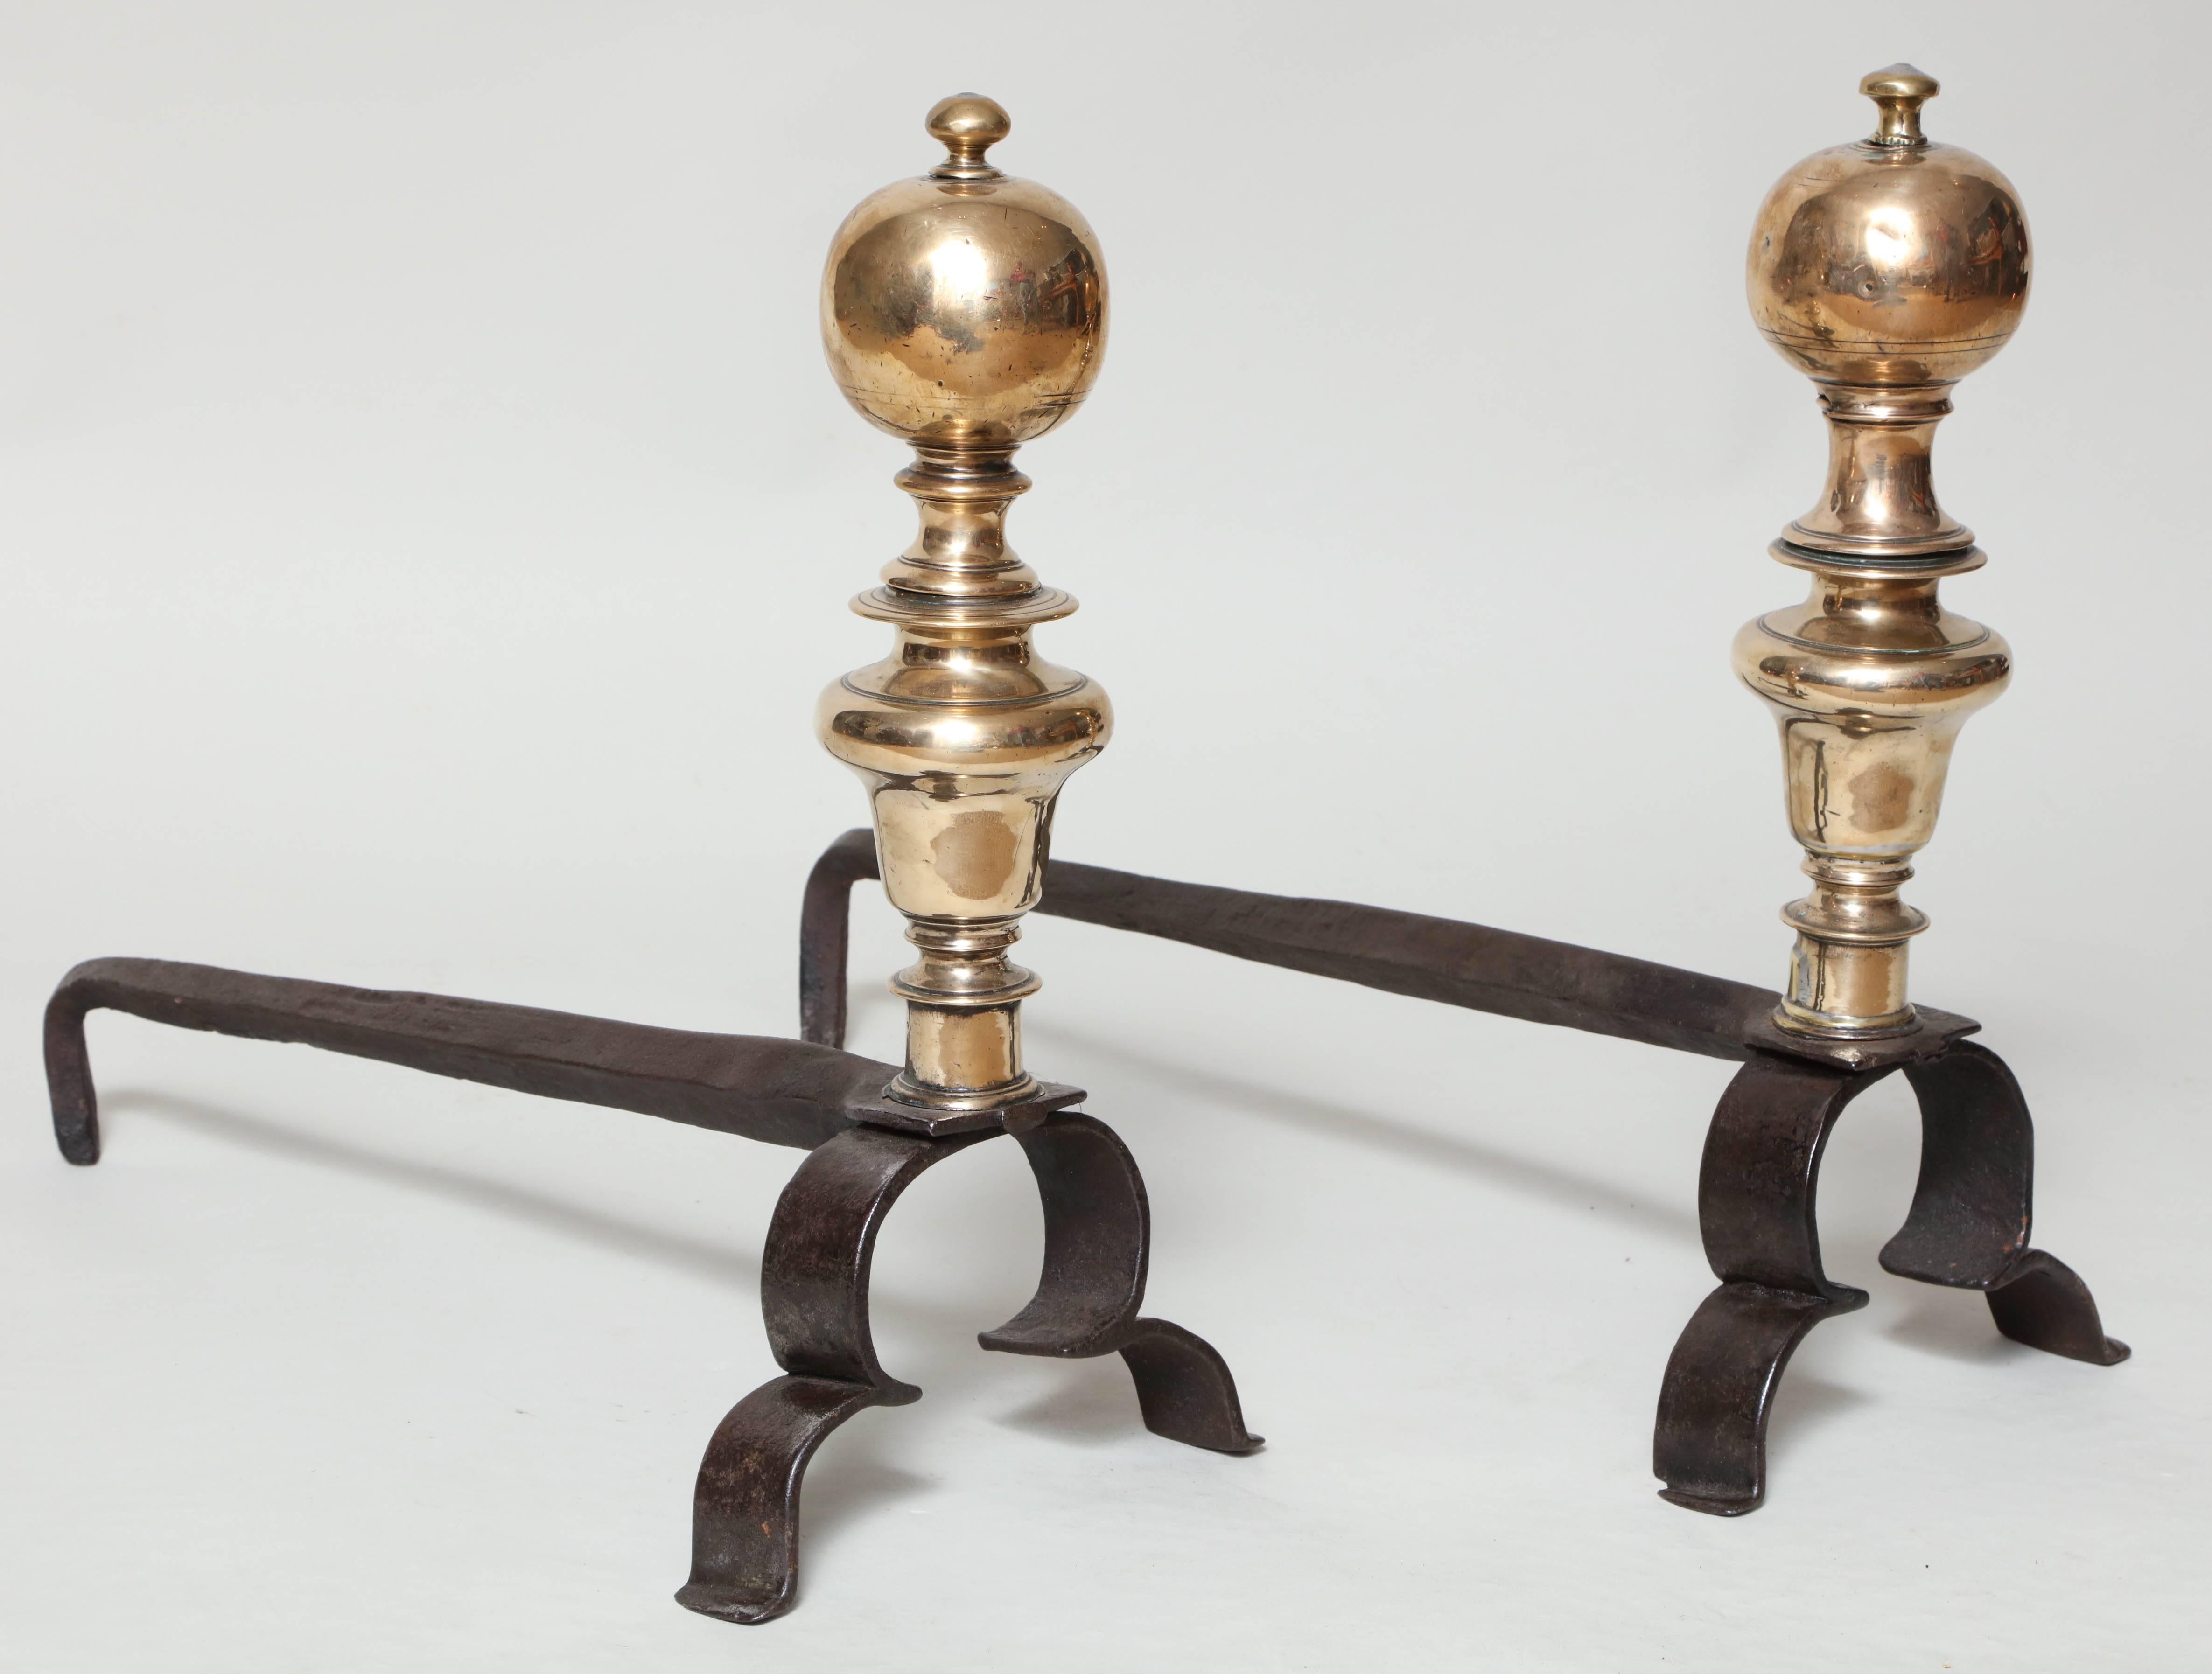 Good pair of Flemish baroque bronze and wrought iron andirons with large ball finials over balustrade turned shafts on simple double scrolled wrought iron legs.